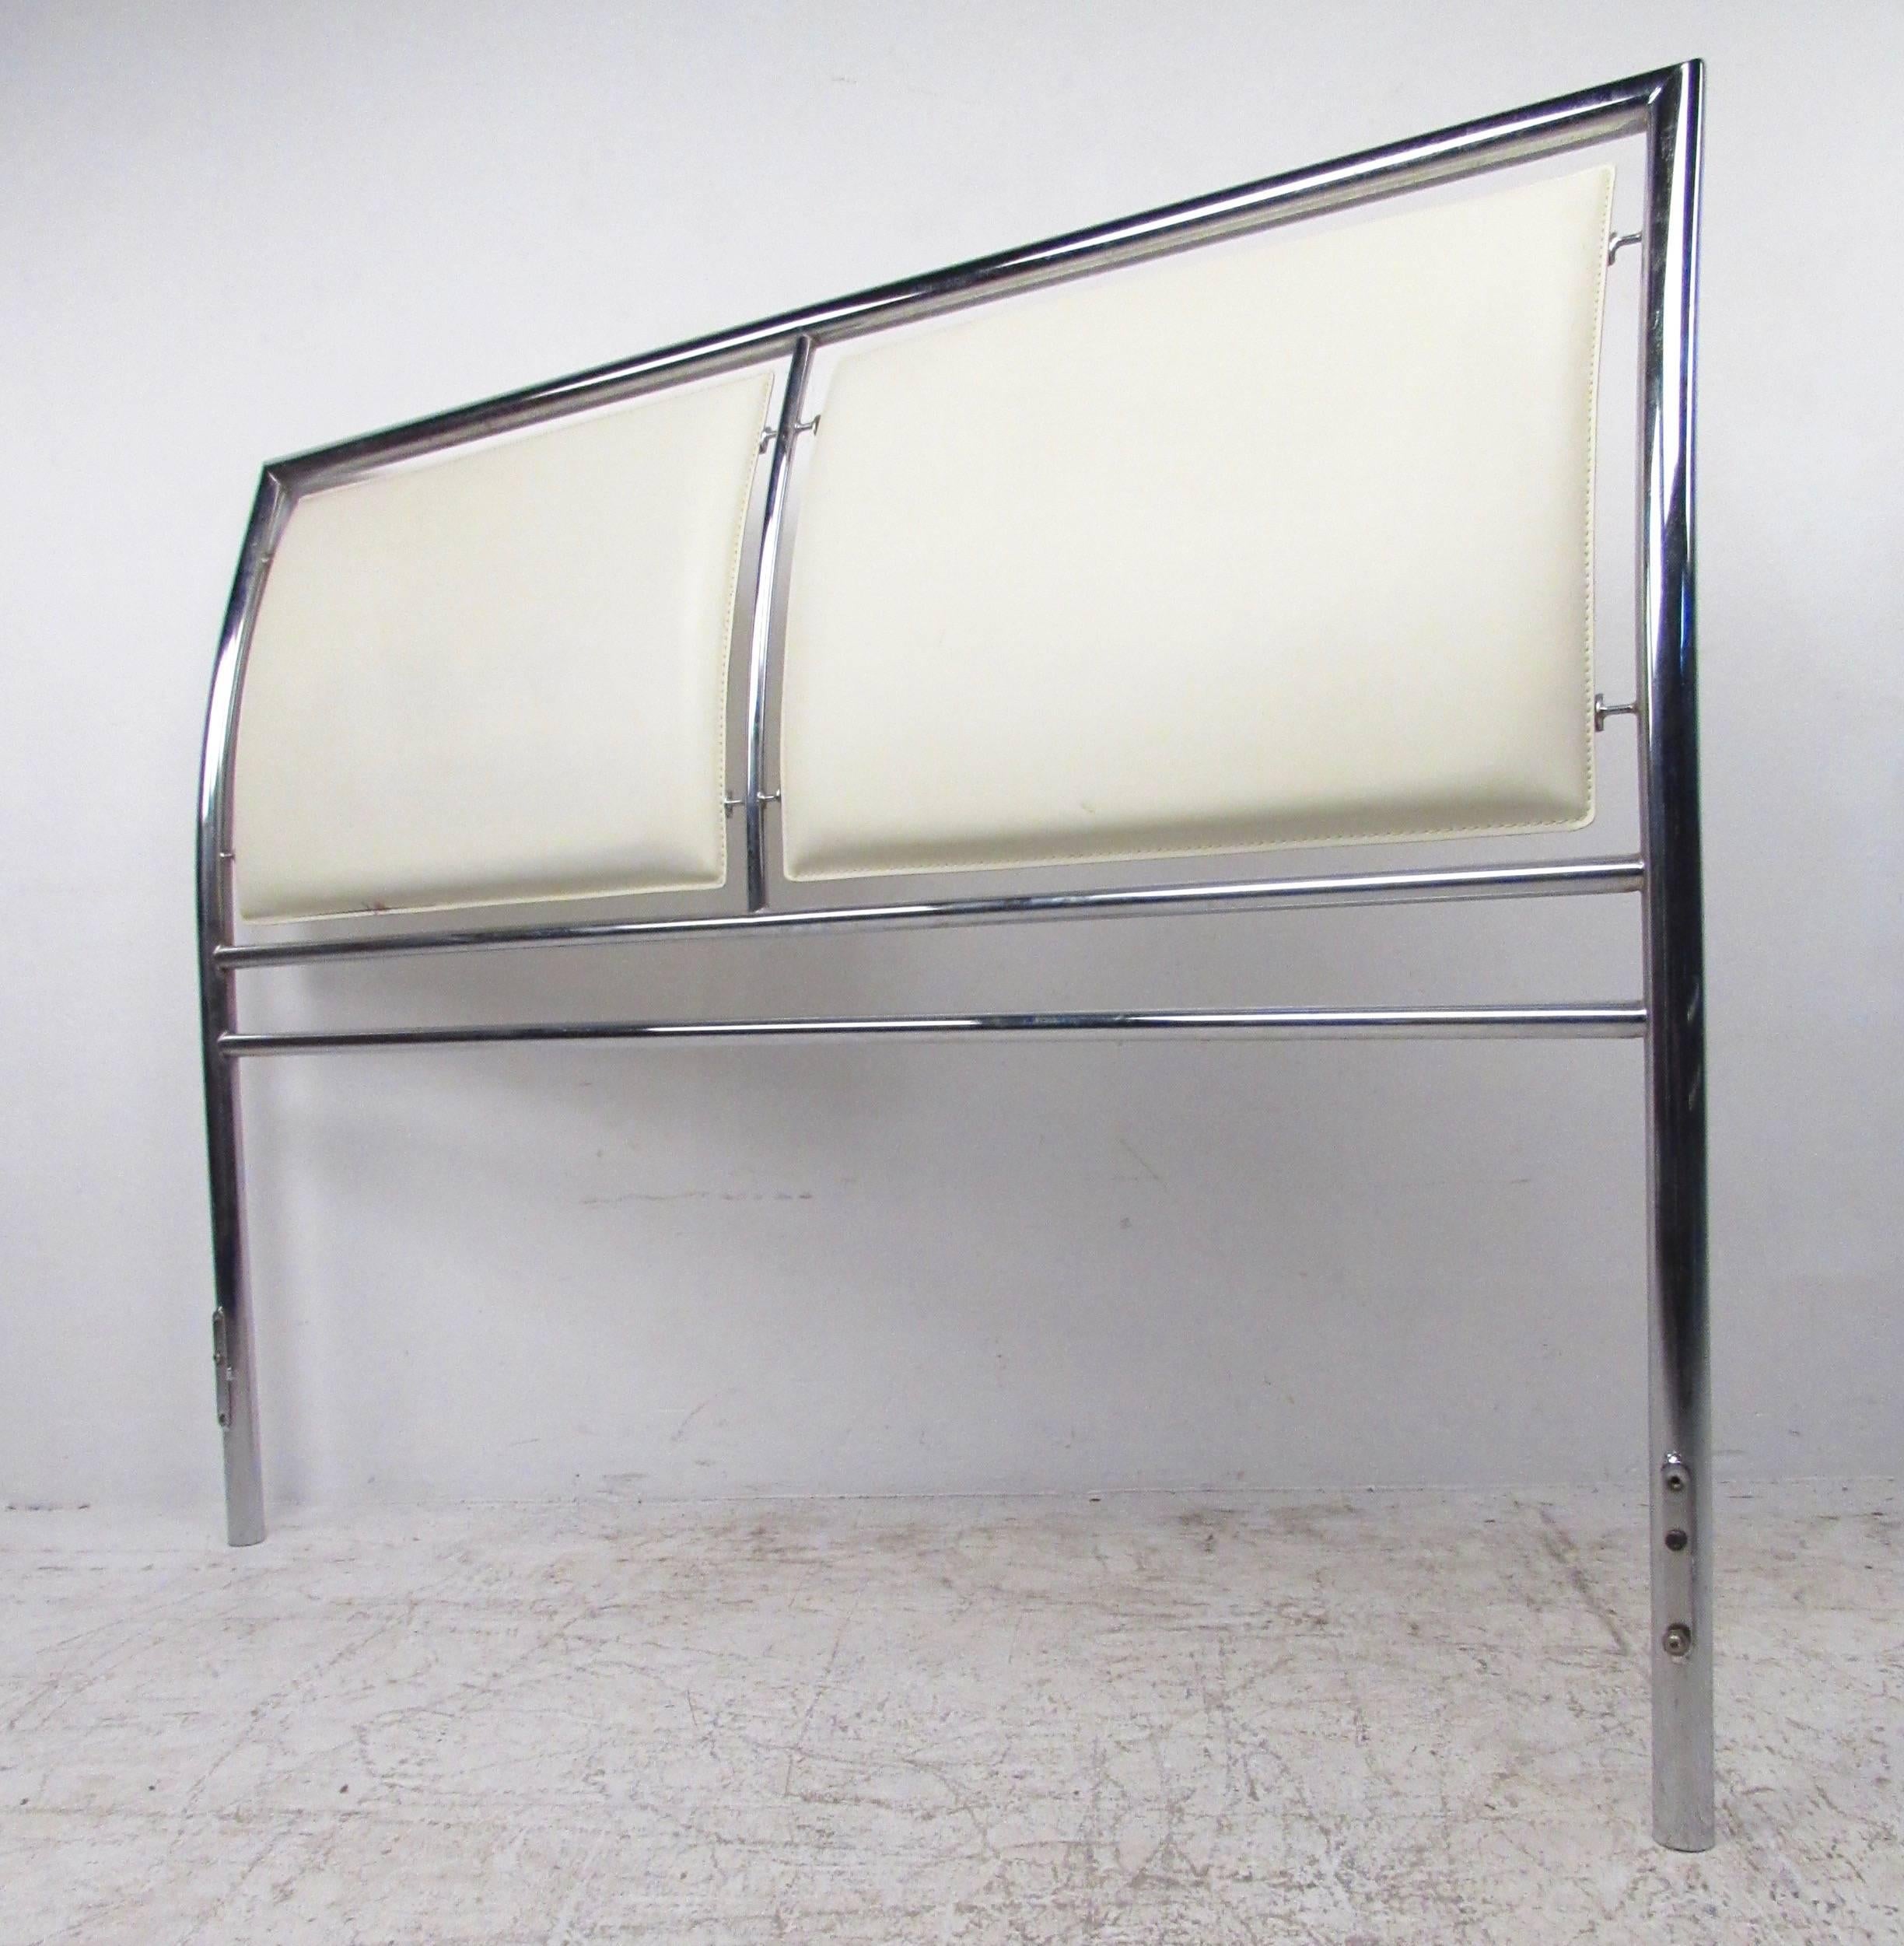 This contemporary vinyl and chrome headboard and footboard feature stylish modern design in a sleek chrome finish. Dual panel upholstered headboard combines style and functionality making a beautiful addition to any bedroom. Please confirm item